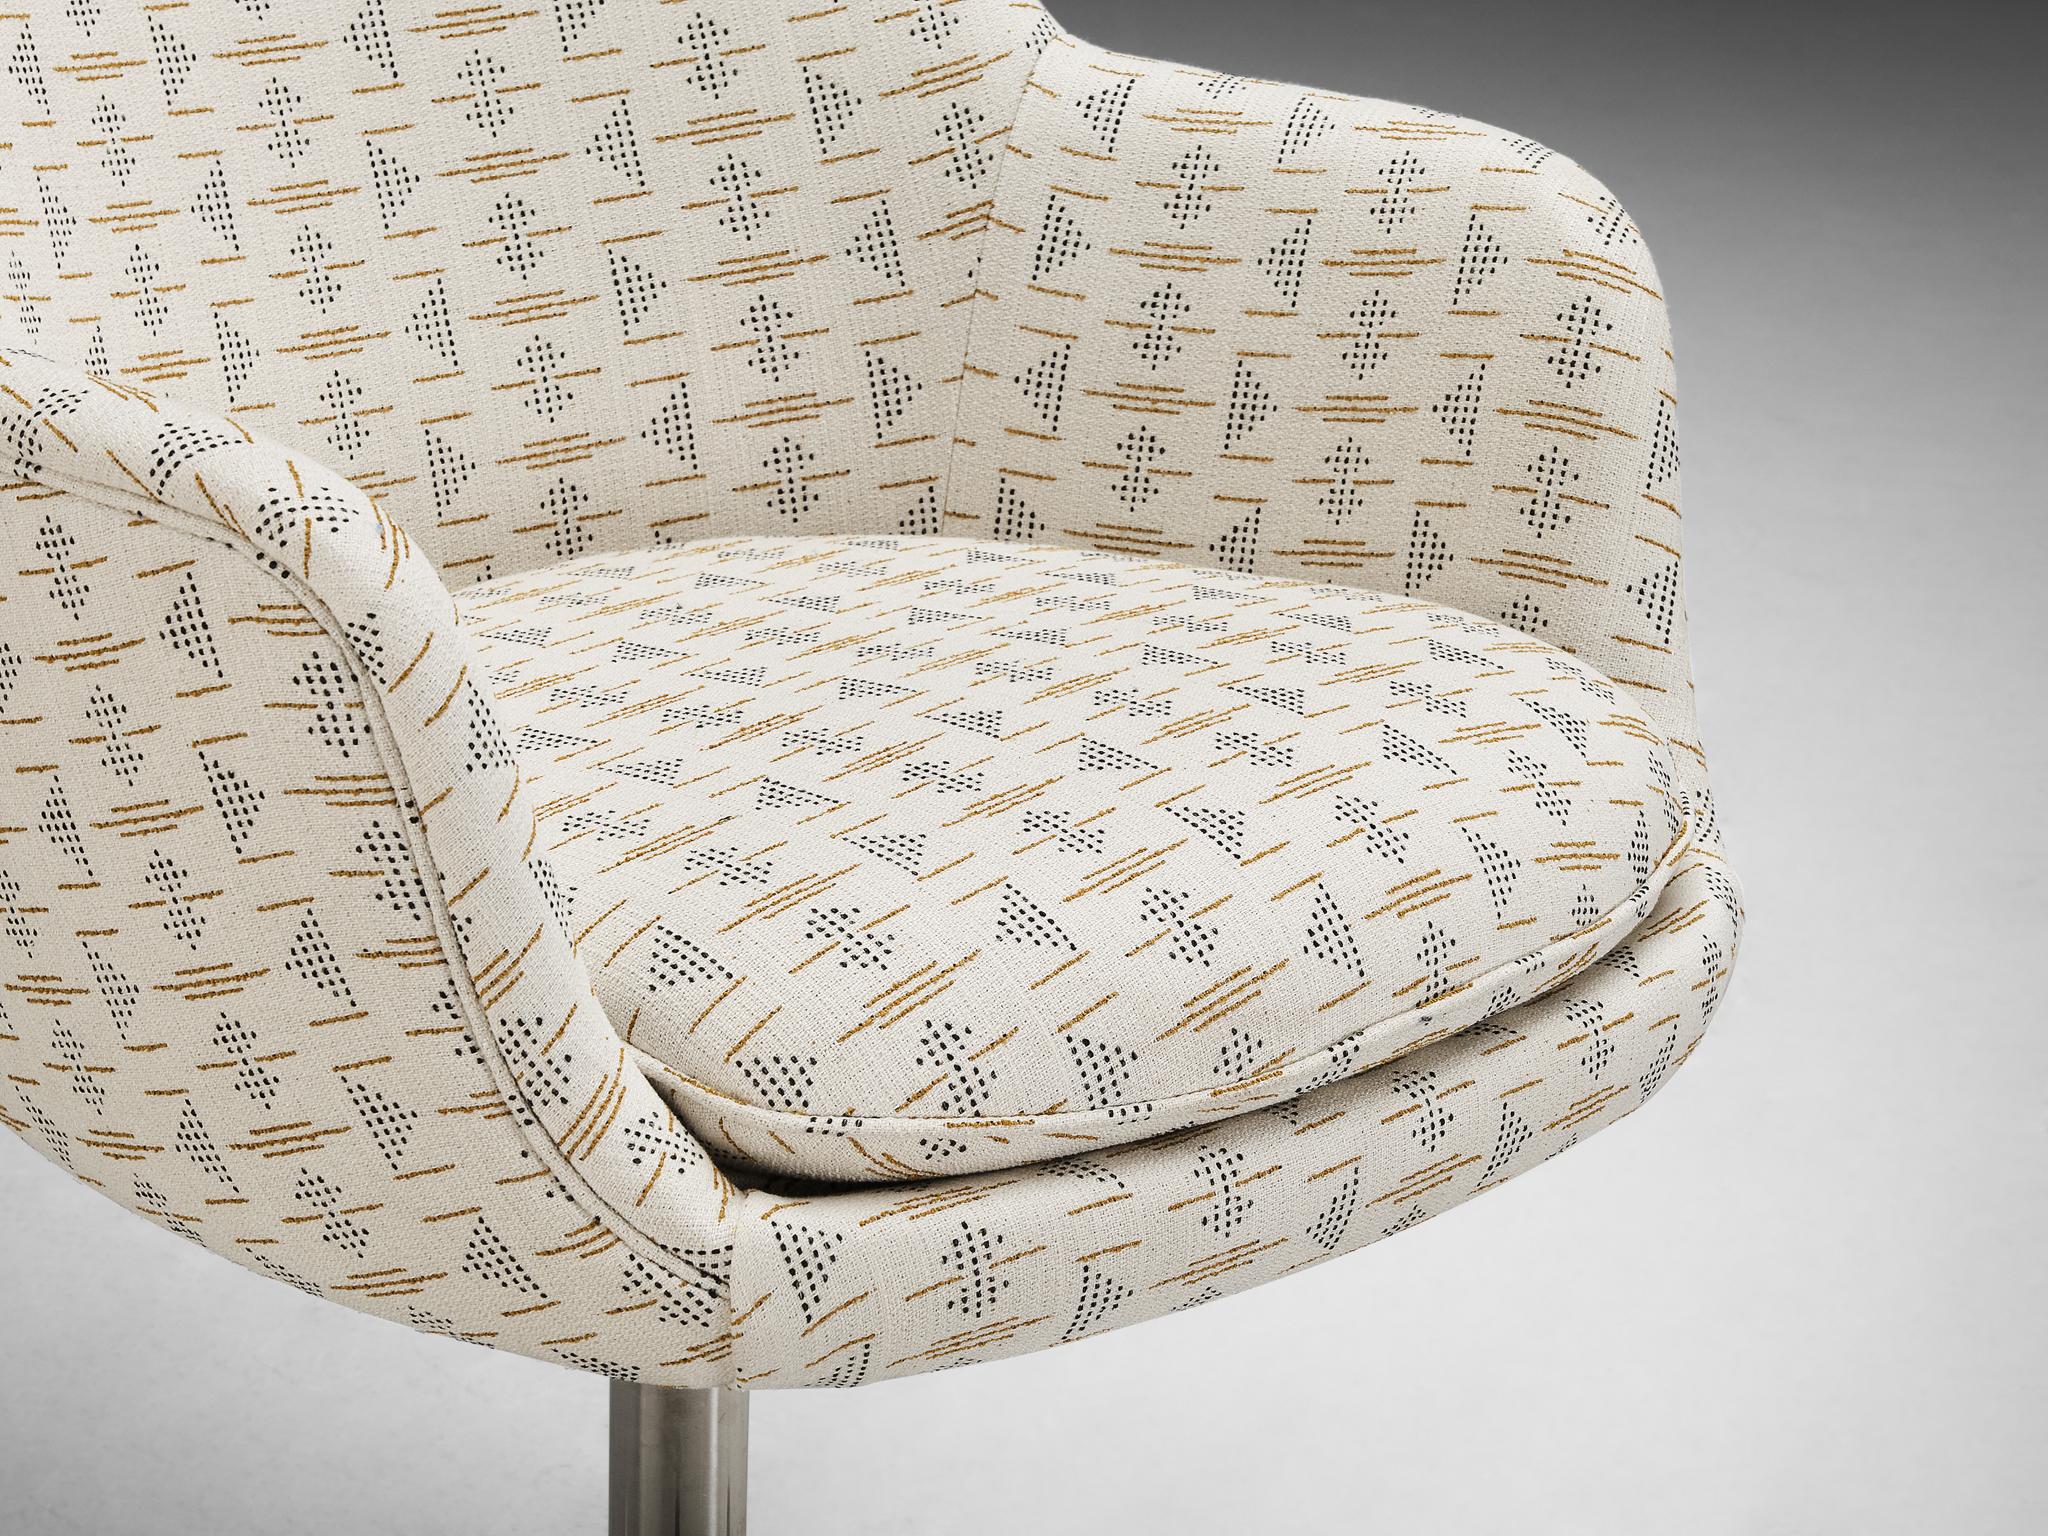 Chrome Nicos Zographos 'Bucket' Dining Chair in Patterned Upholstery 